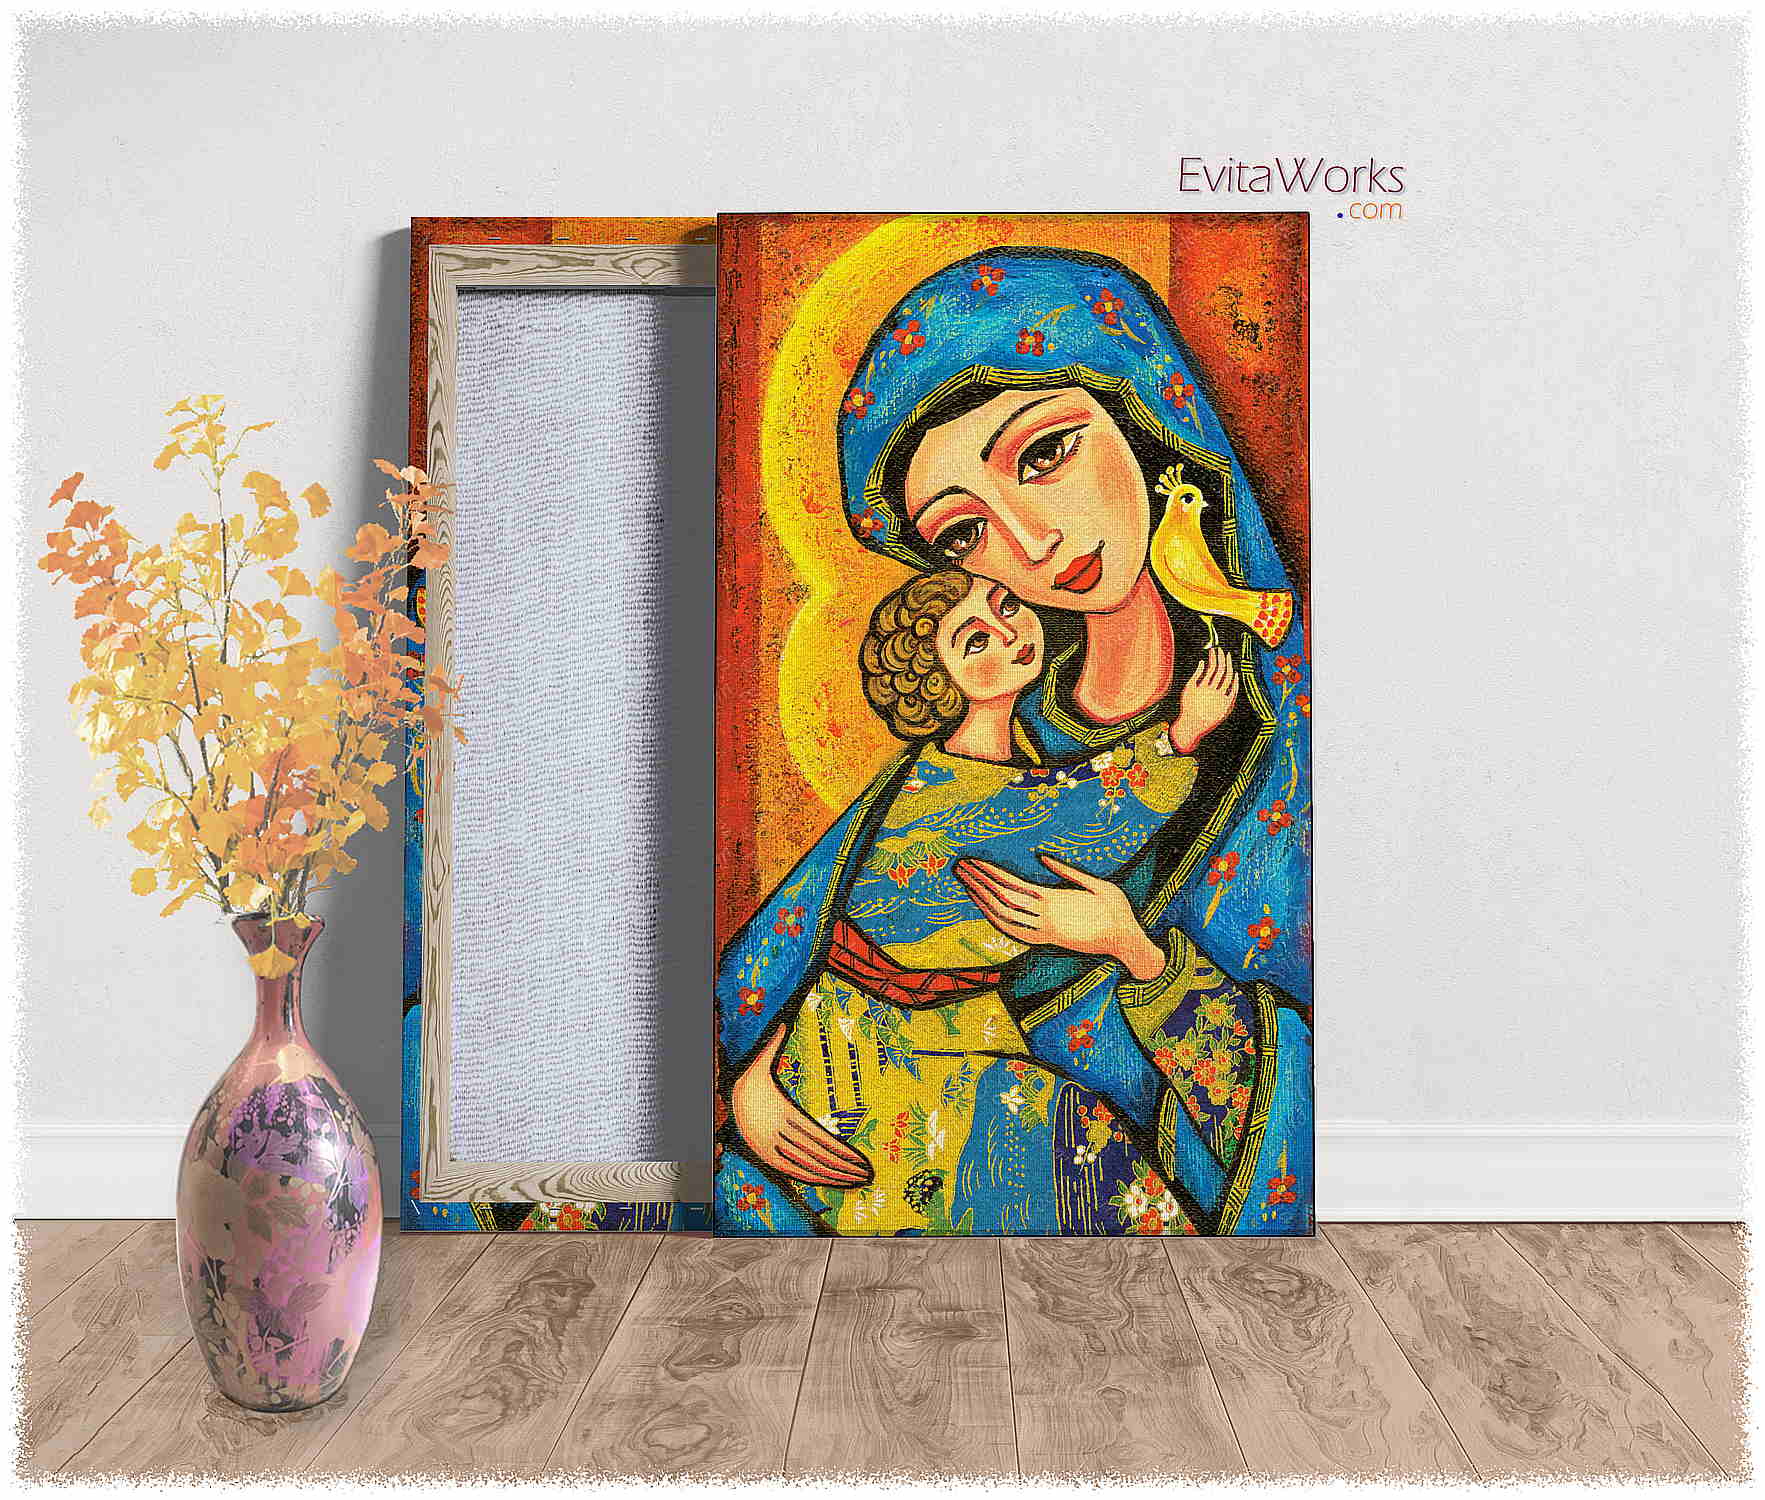 Hit to learn about "Mother Temple, Madonna and Child" on canvases